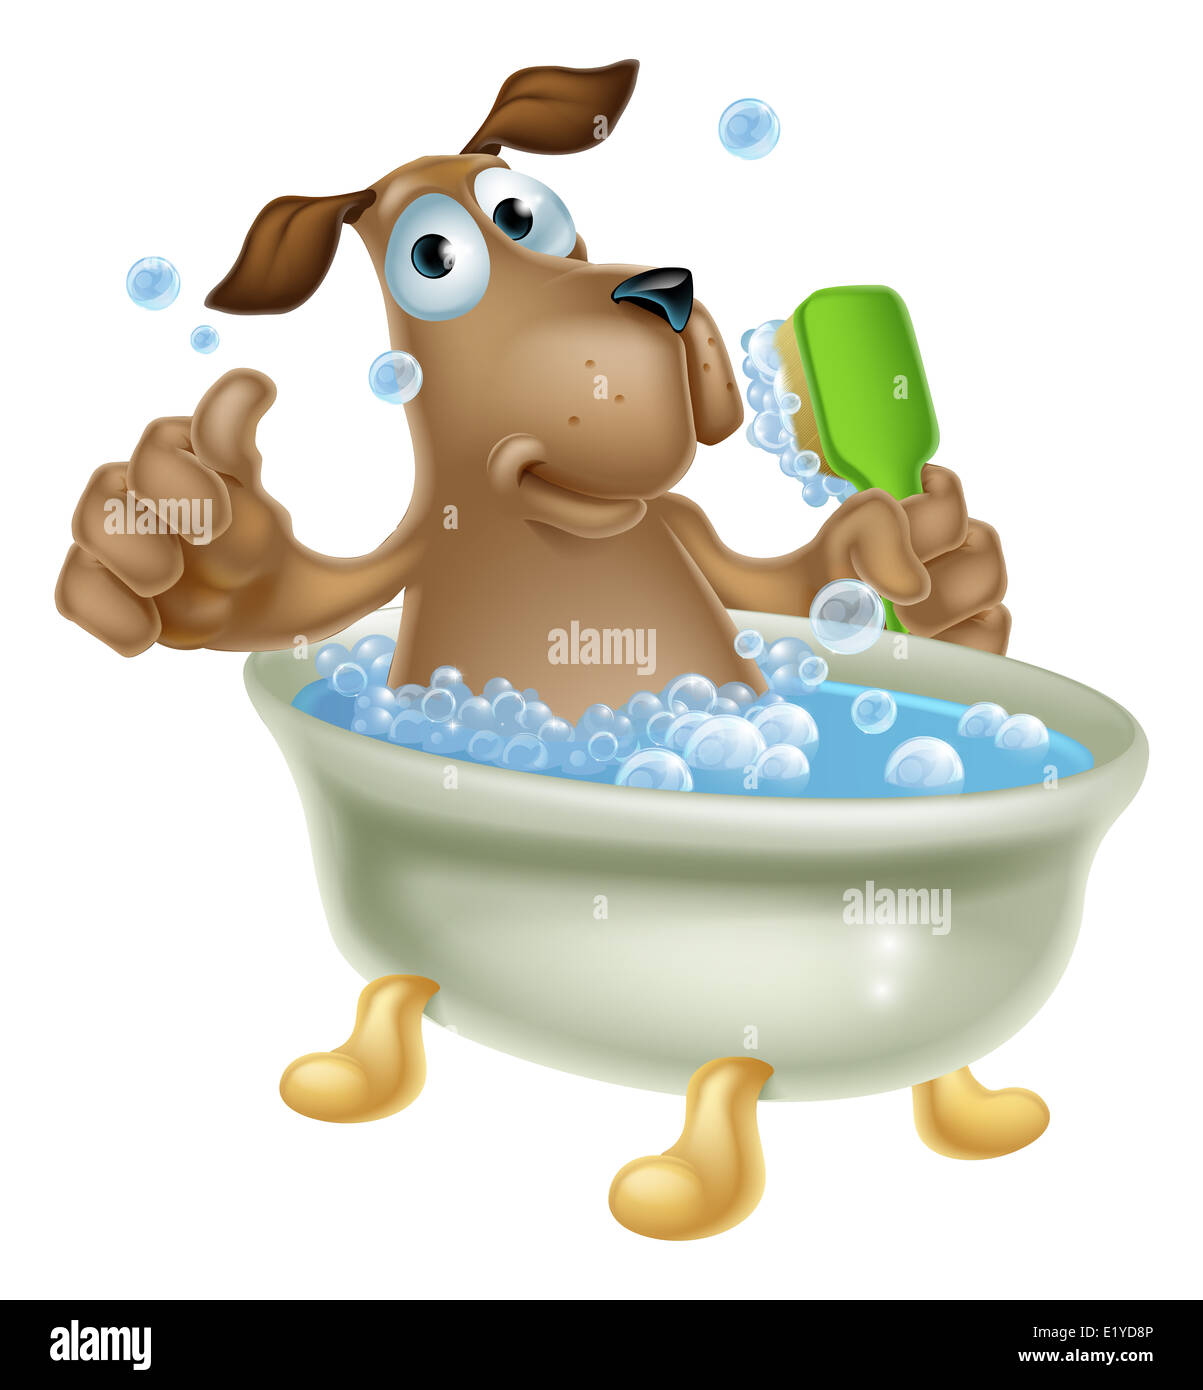 An illustration of a cute cartoon dog mascot character having a bath in a bubble bath with back scrubber Stock Photo